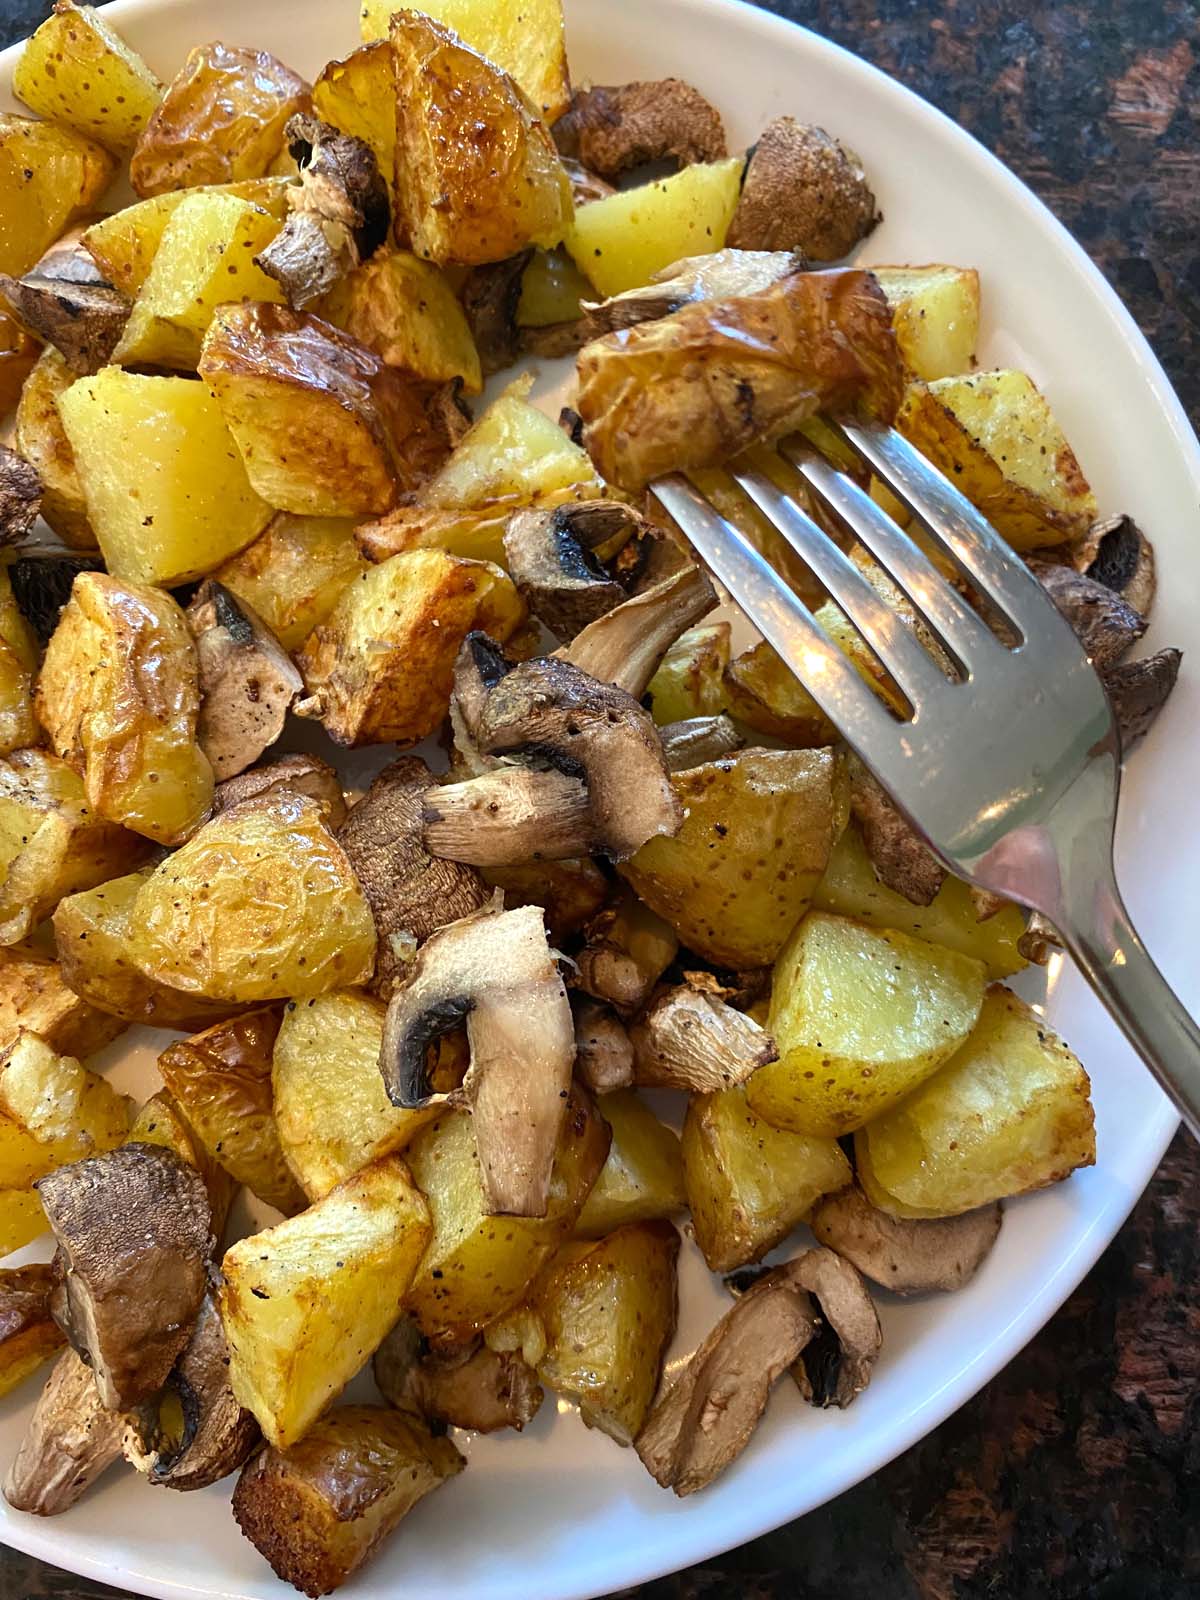 Cooked potatoes and mushrooms on a white plate.